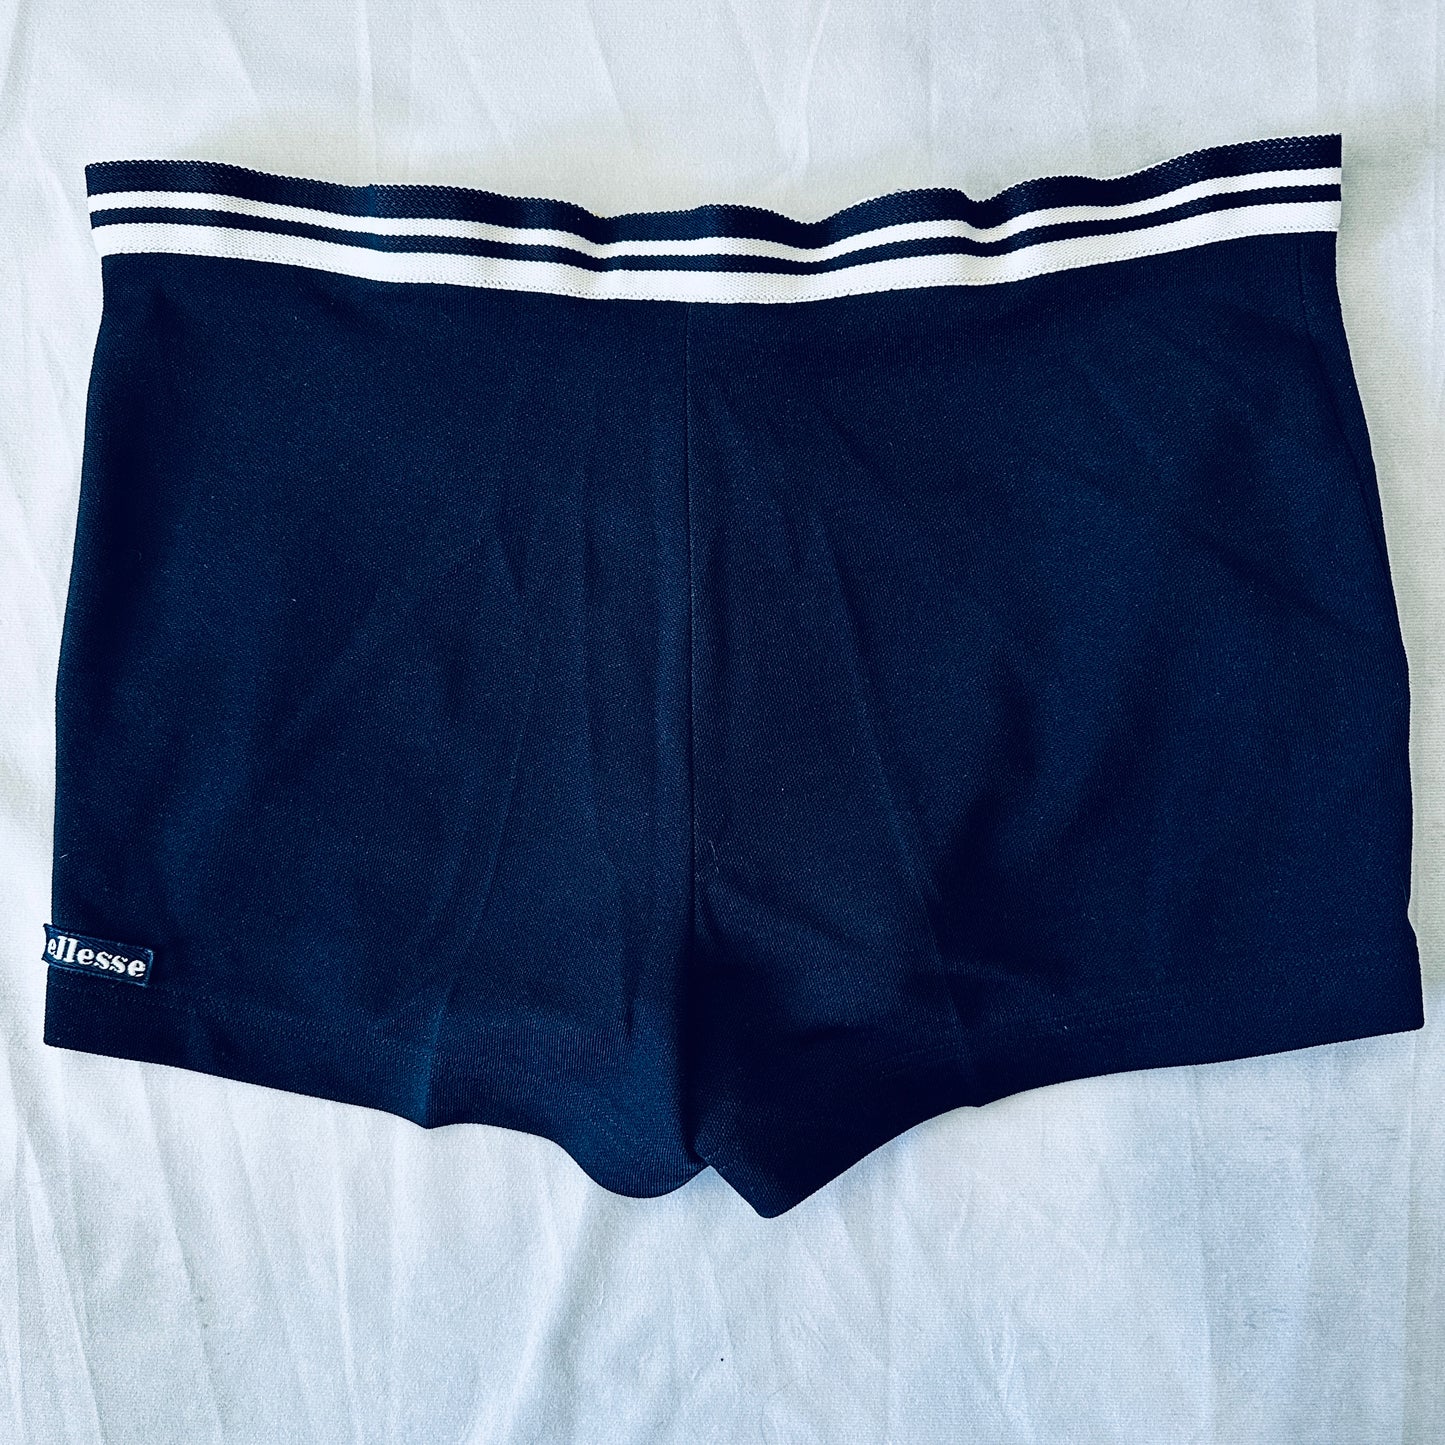 Ellesse 80s Vintage Tennis Shorts - Navy - L - Made in Italy